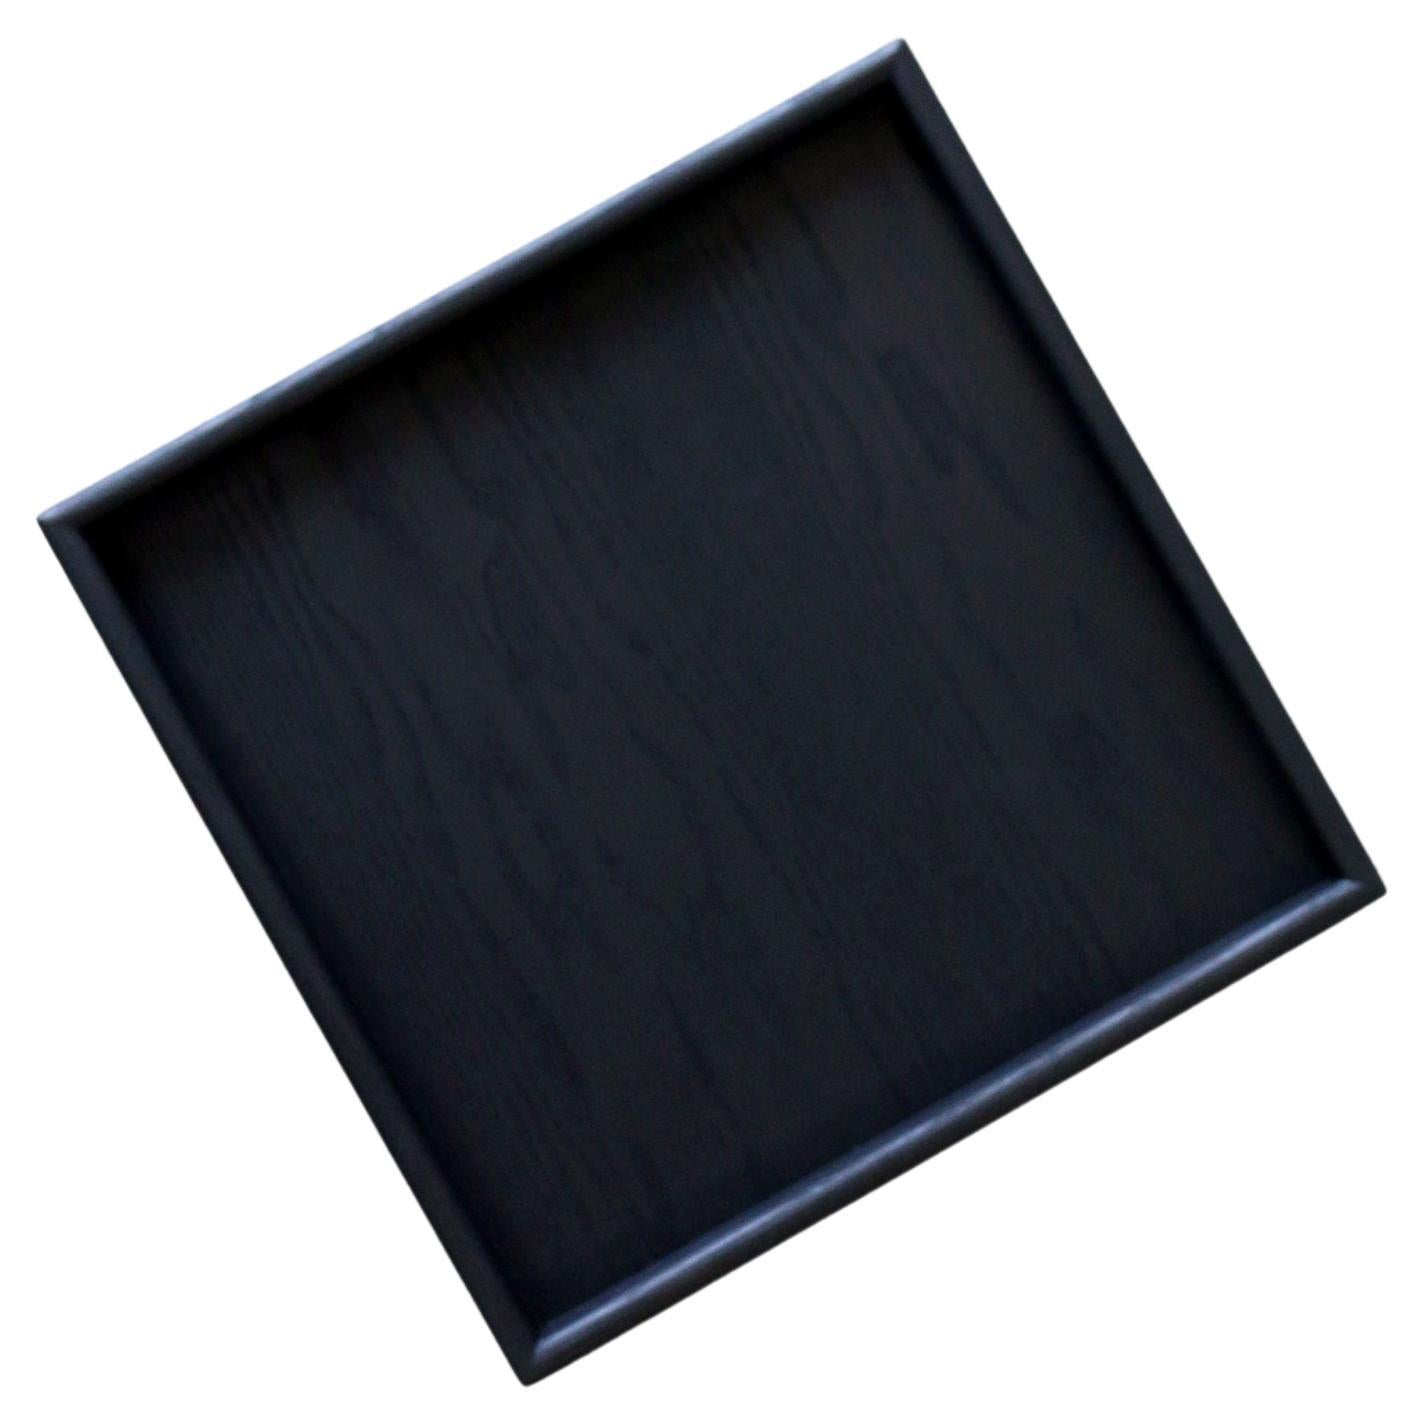 Handmade Square Black Wooden Serving Tray For Sale